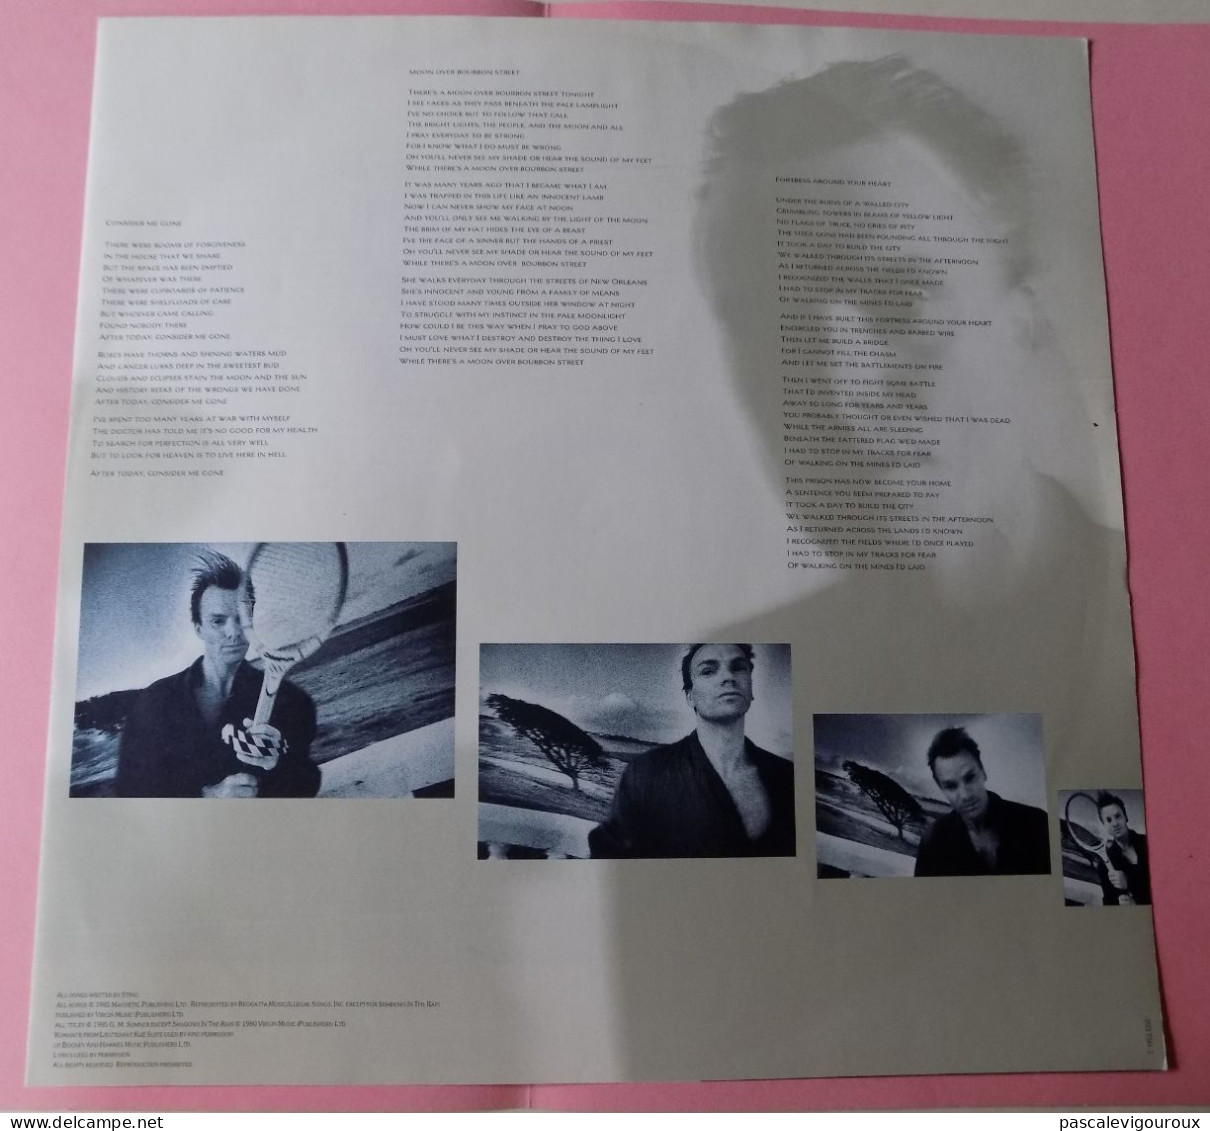 Sting ‎ The Dream Of The Blue Turtles A&M Records ‎ 393750 France 1985 33T - Rock